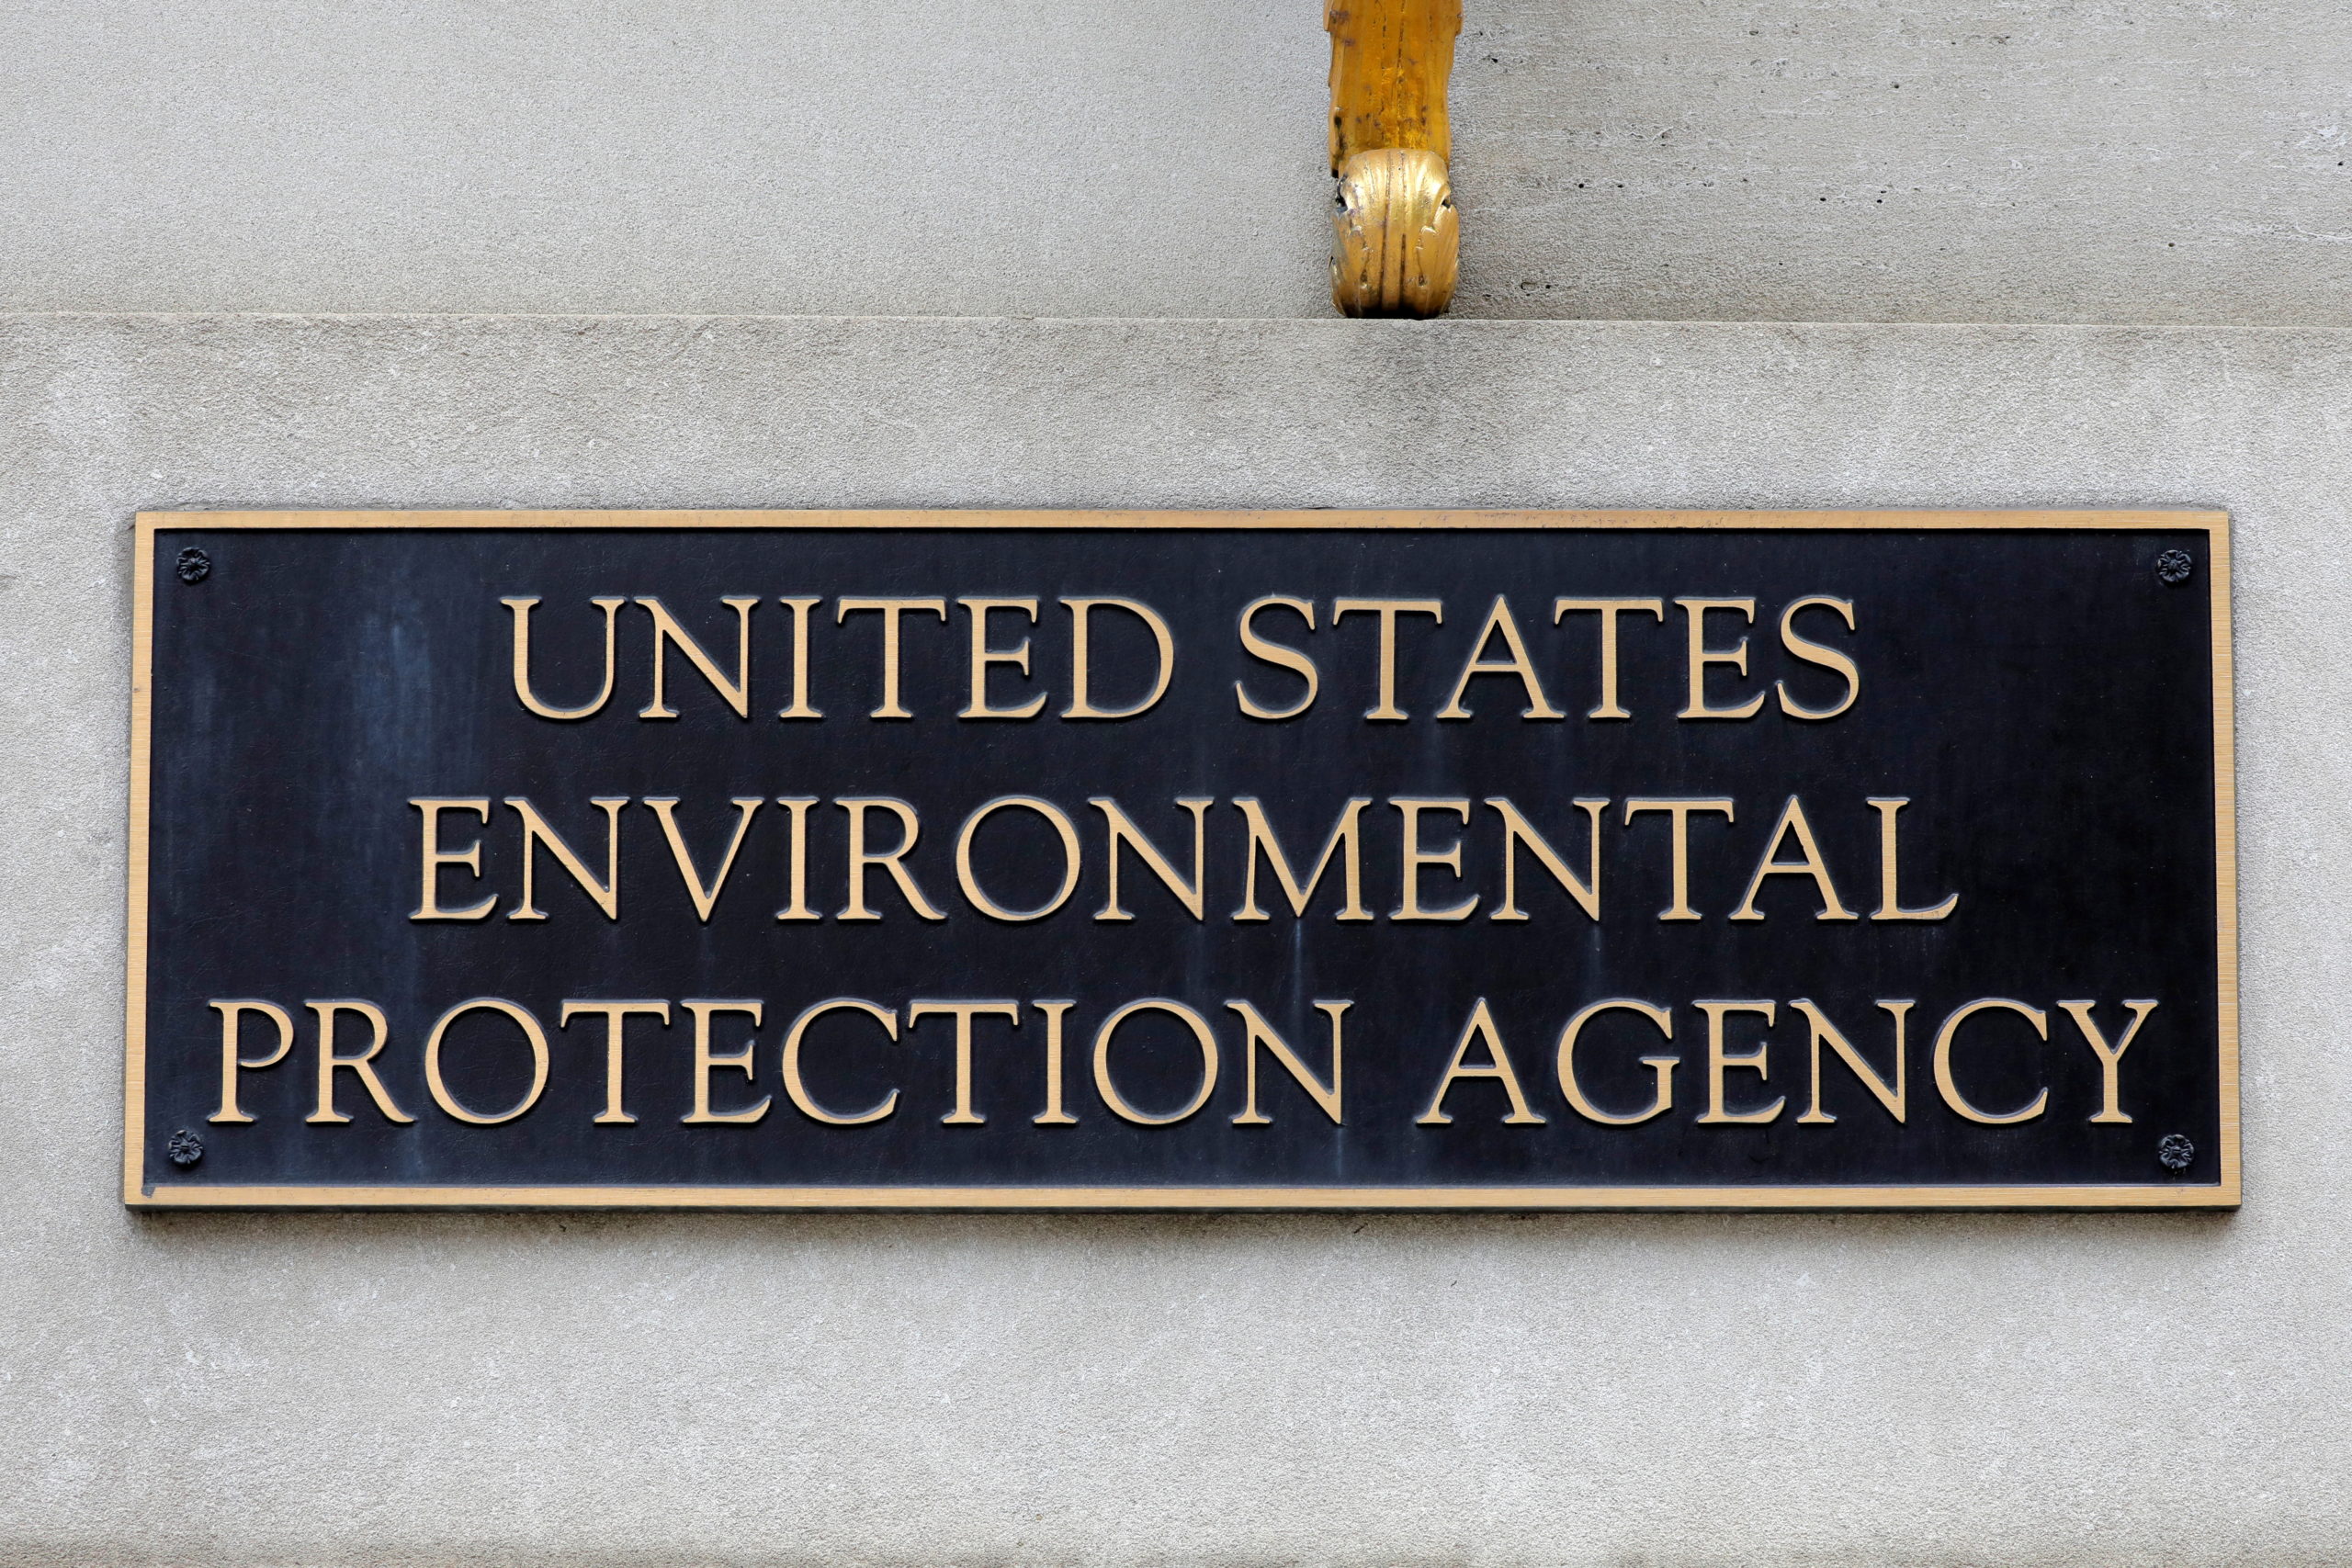 FILE PHOTO: Signage is seen at the headquarters of the United States Environmental Protection Agency (EPA) in Washington, D.C., U.S., May 10, 2021. REUTERS/Andrew Kelly